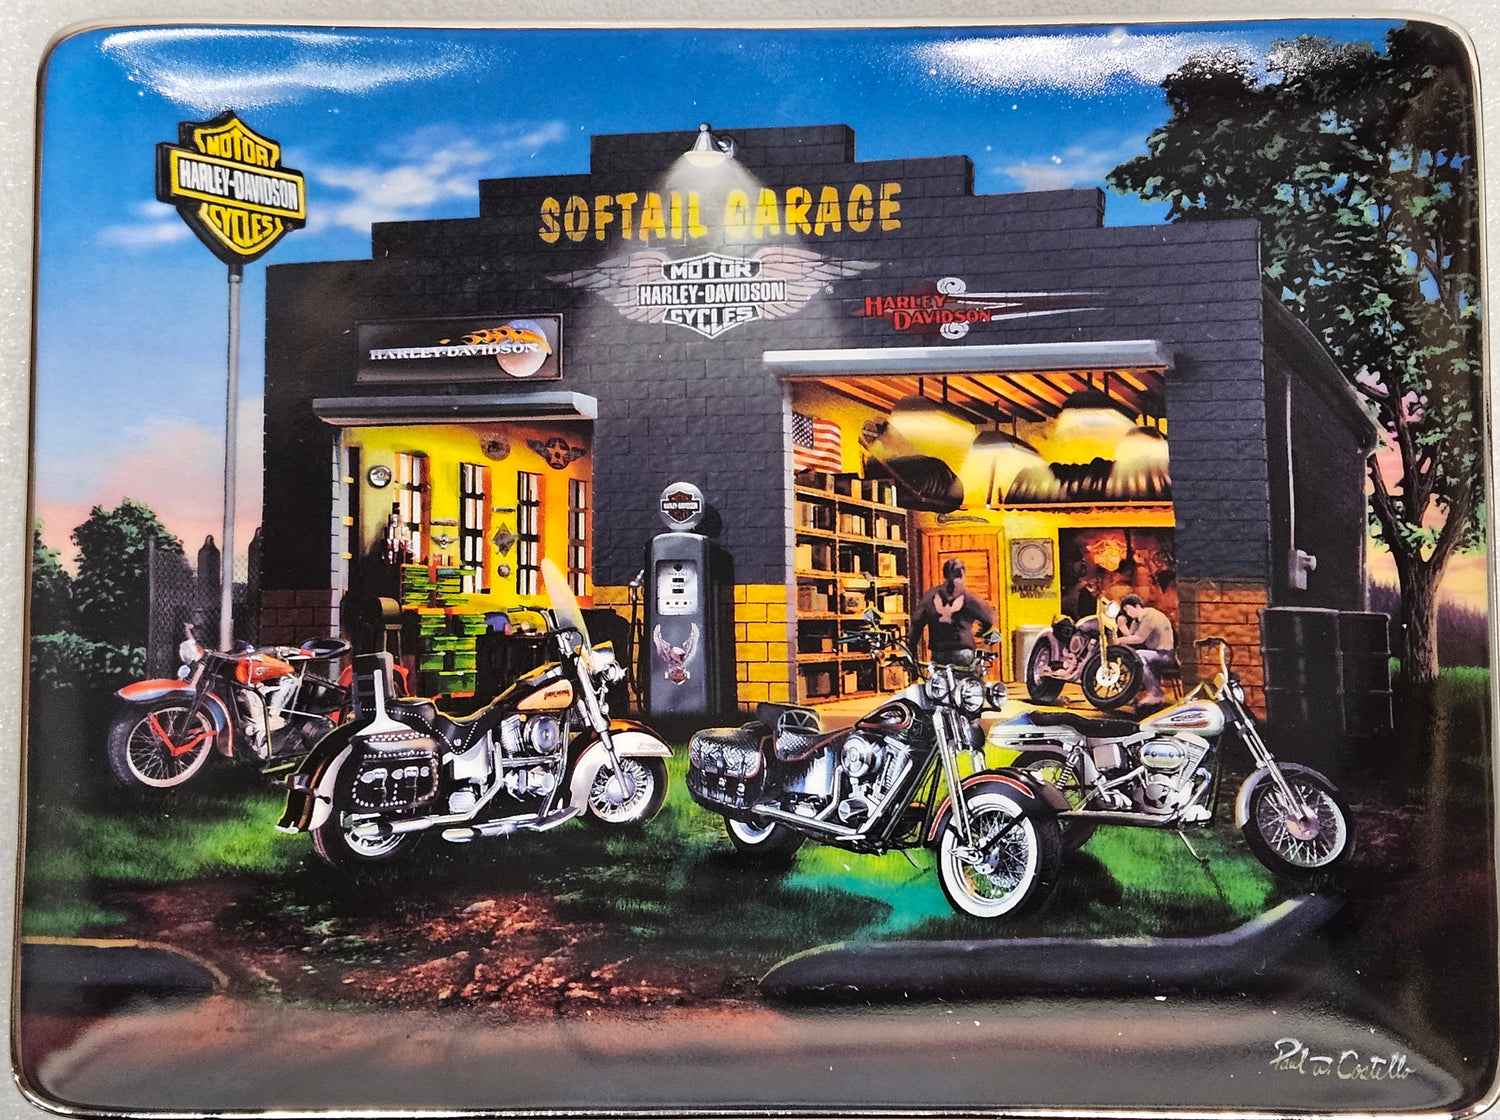 Franklin Mint Harley Davidson Paul Costello Softail Garage Numbered Plate